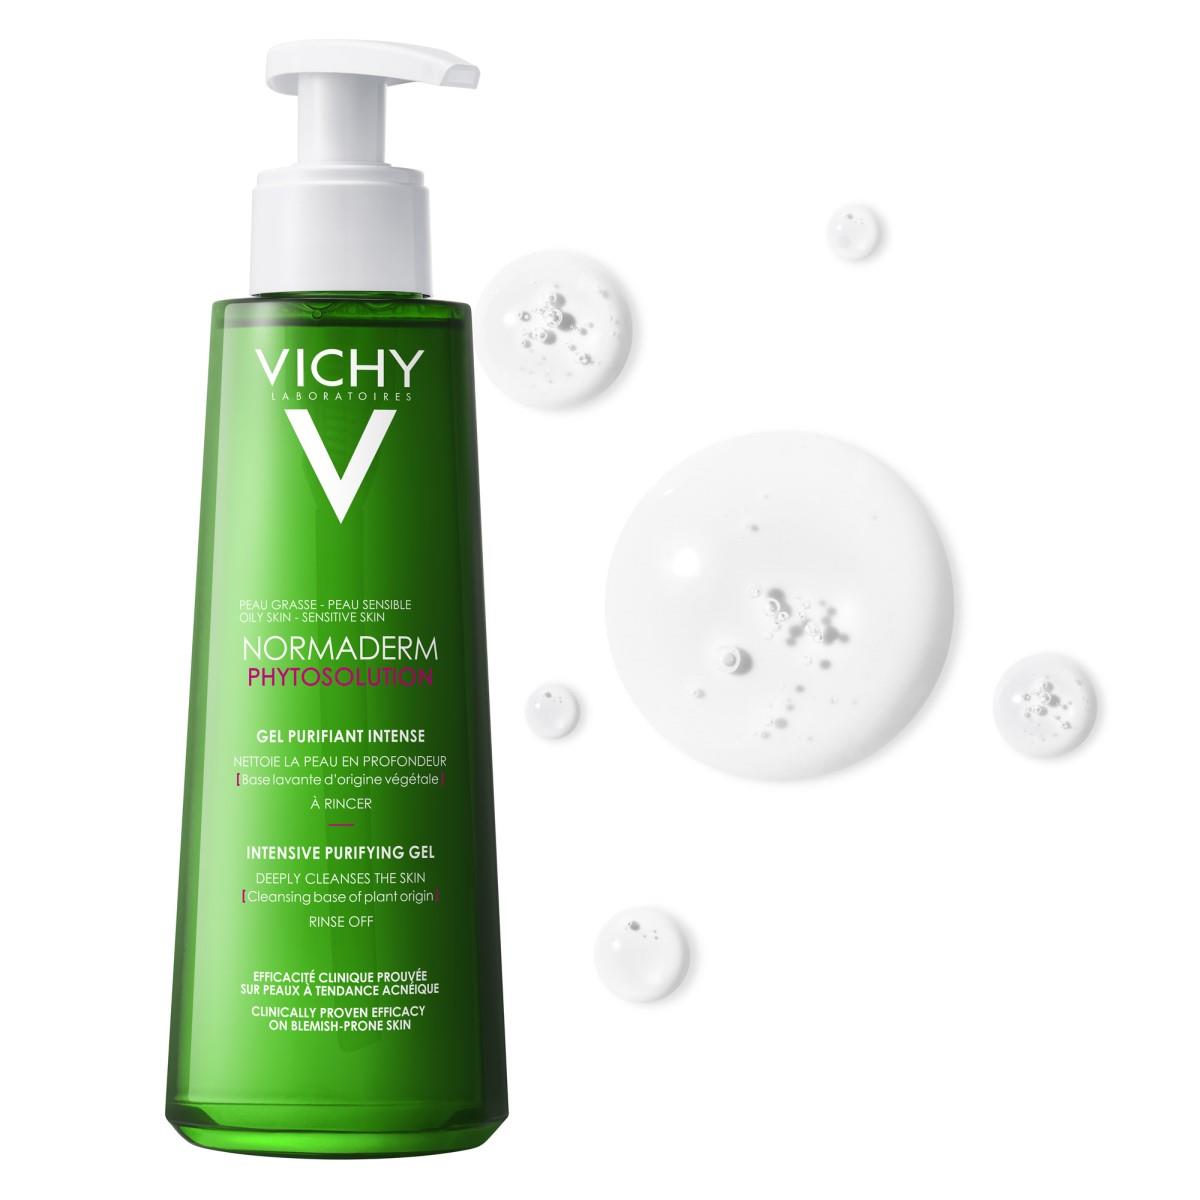 VICHY NORMADERM PHYTOSOLUTION GEL 200ML | The Glow Shop